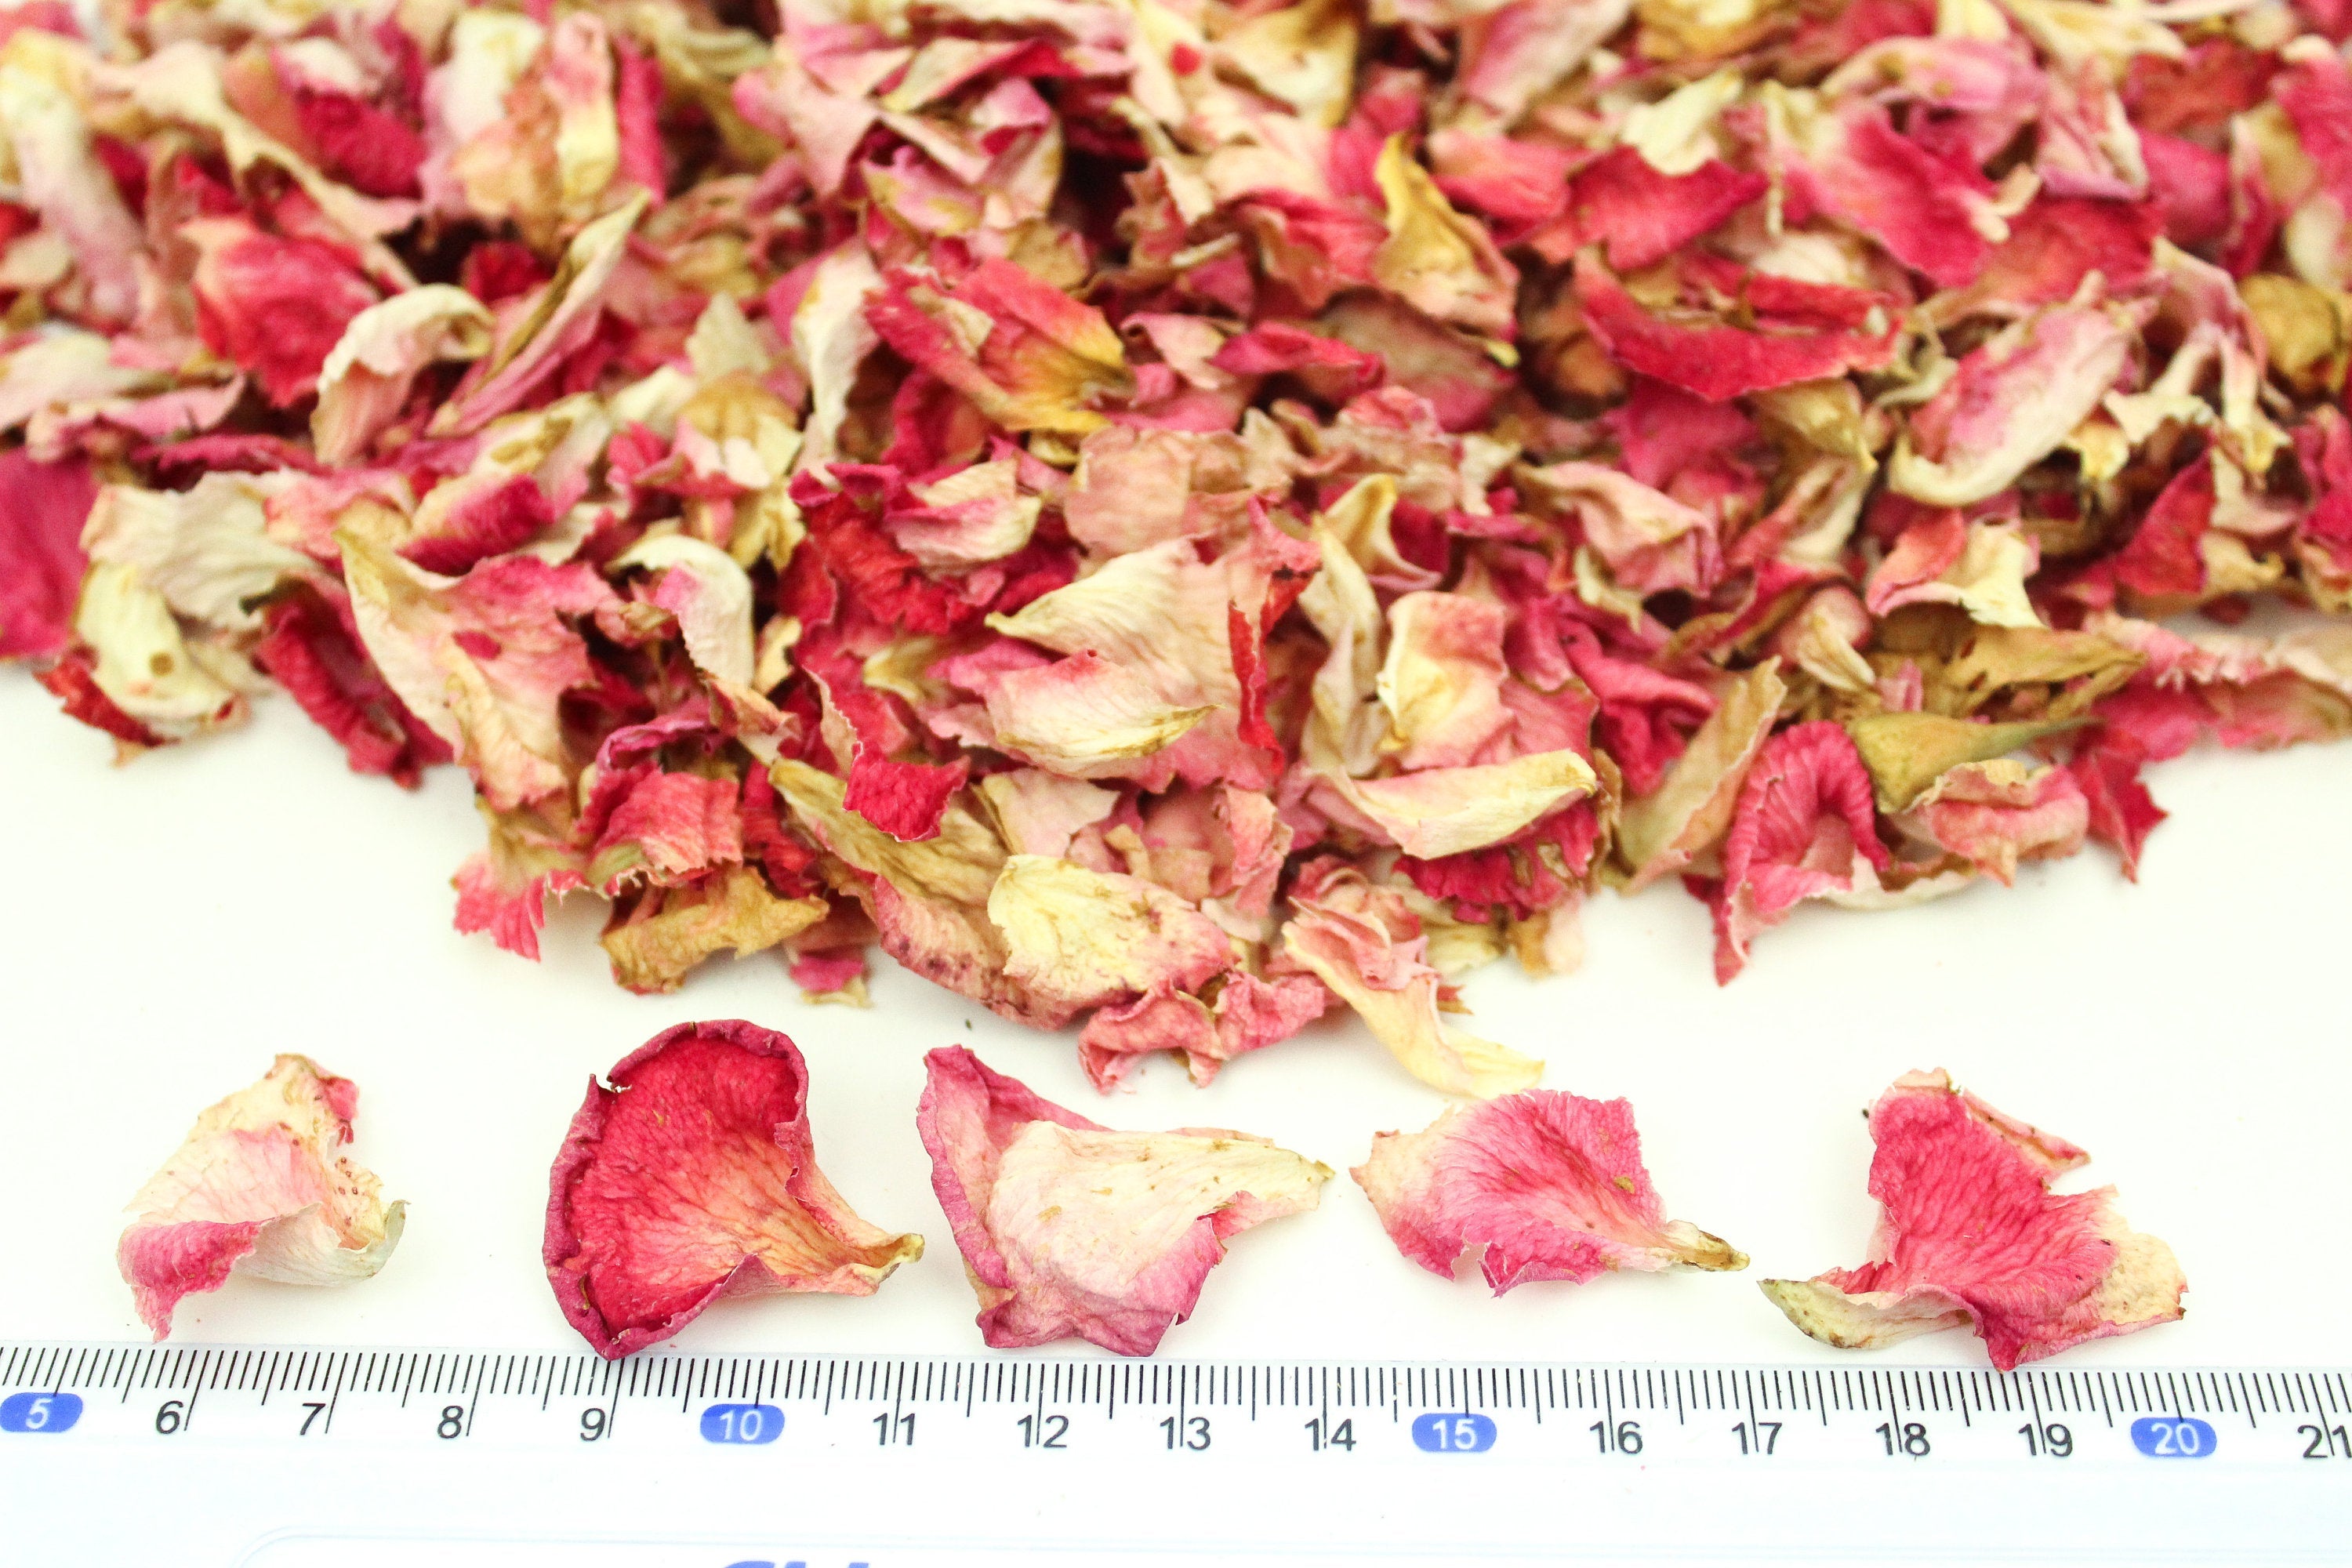 Red and yellow rose petals, High Quality, Natural, Organic, Biodegraddable, Wedding, Craft, Edible, Confetti, Wedding toss, Wedding confetti